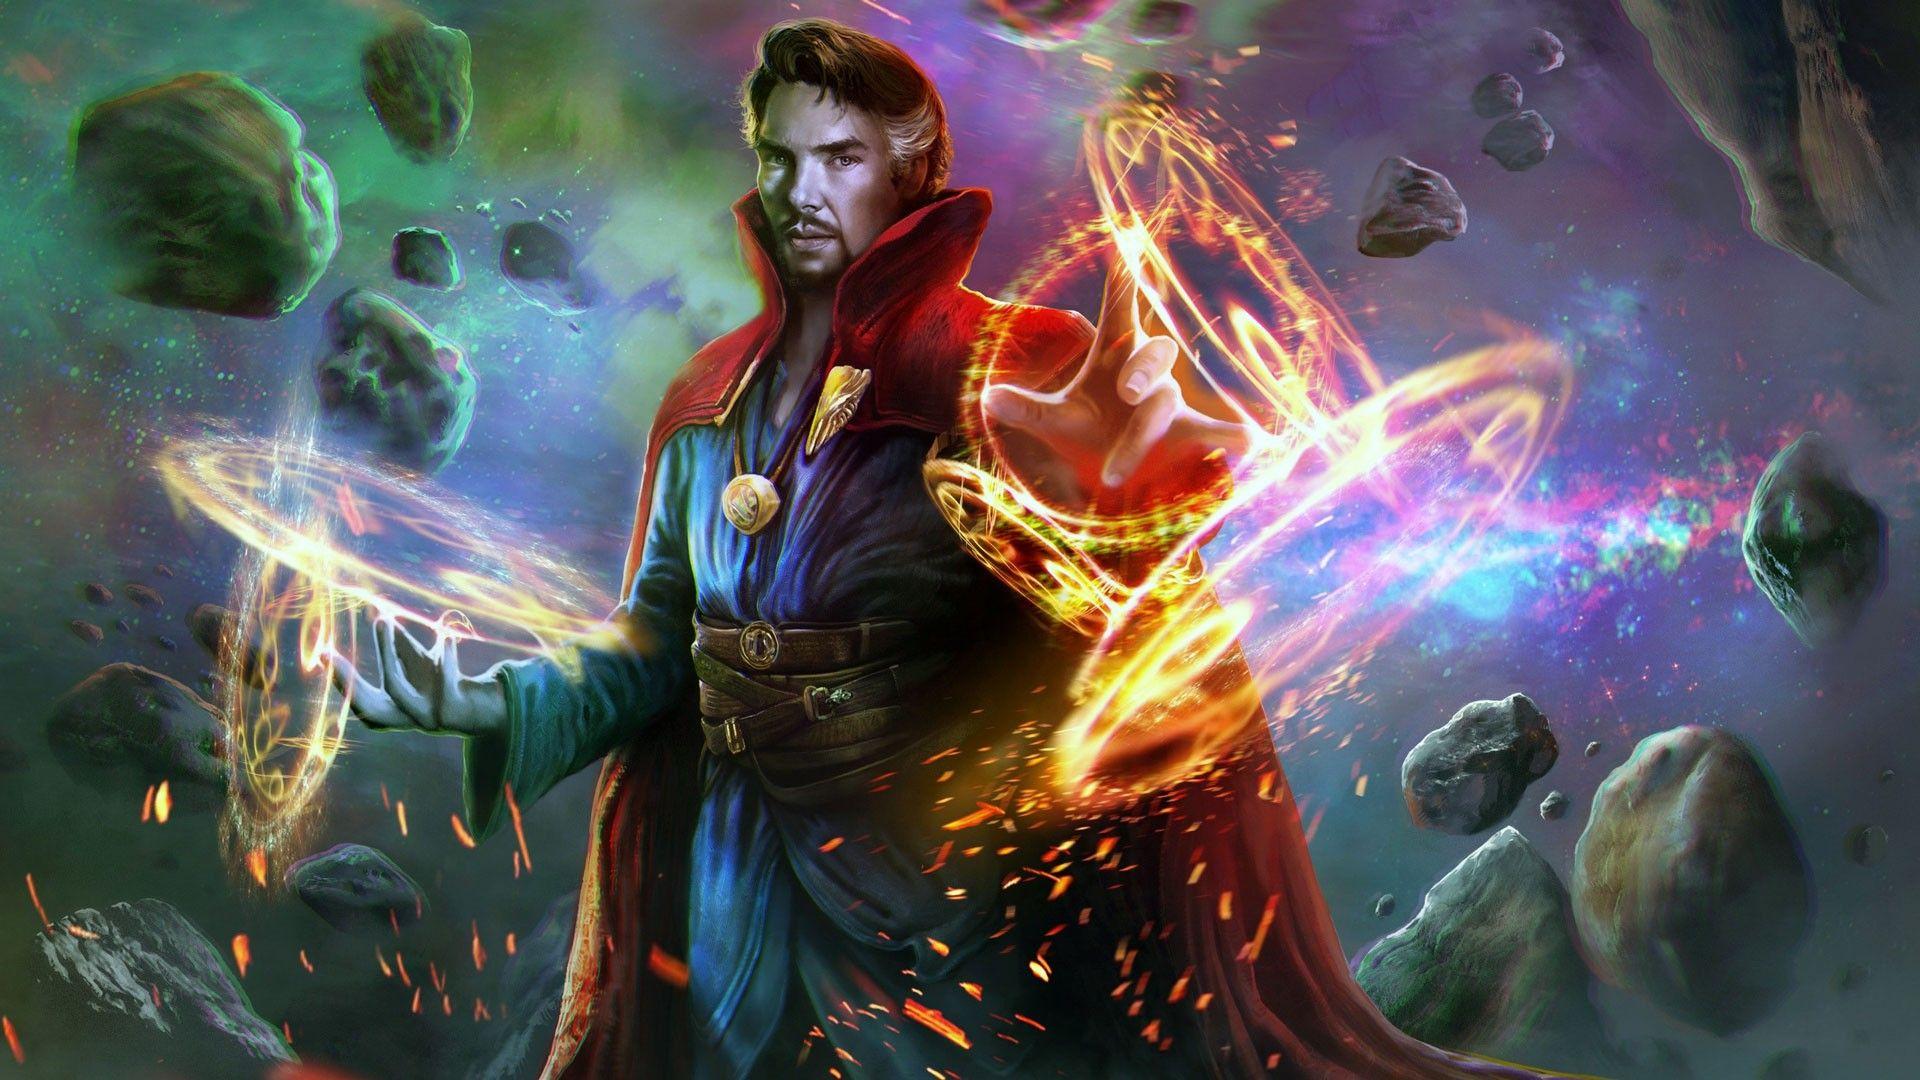 Dr Strange wallpapers ·① Download free cool High Resolution